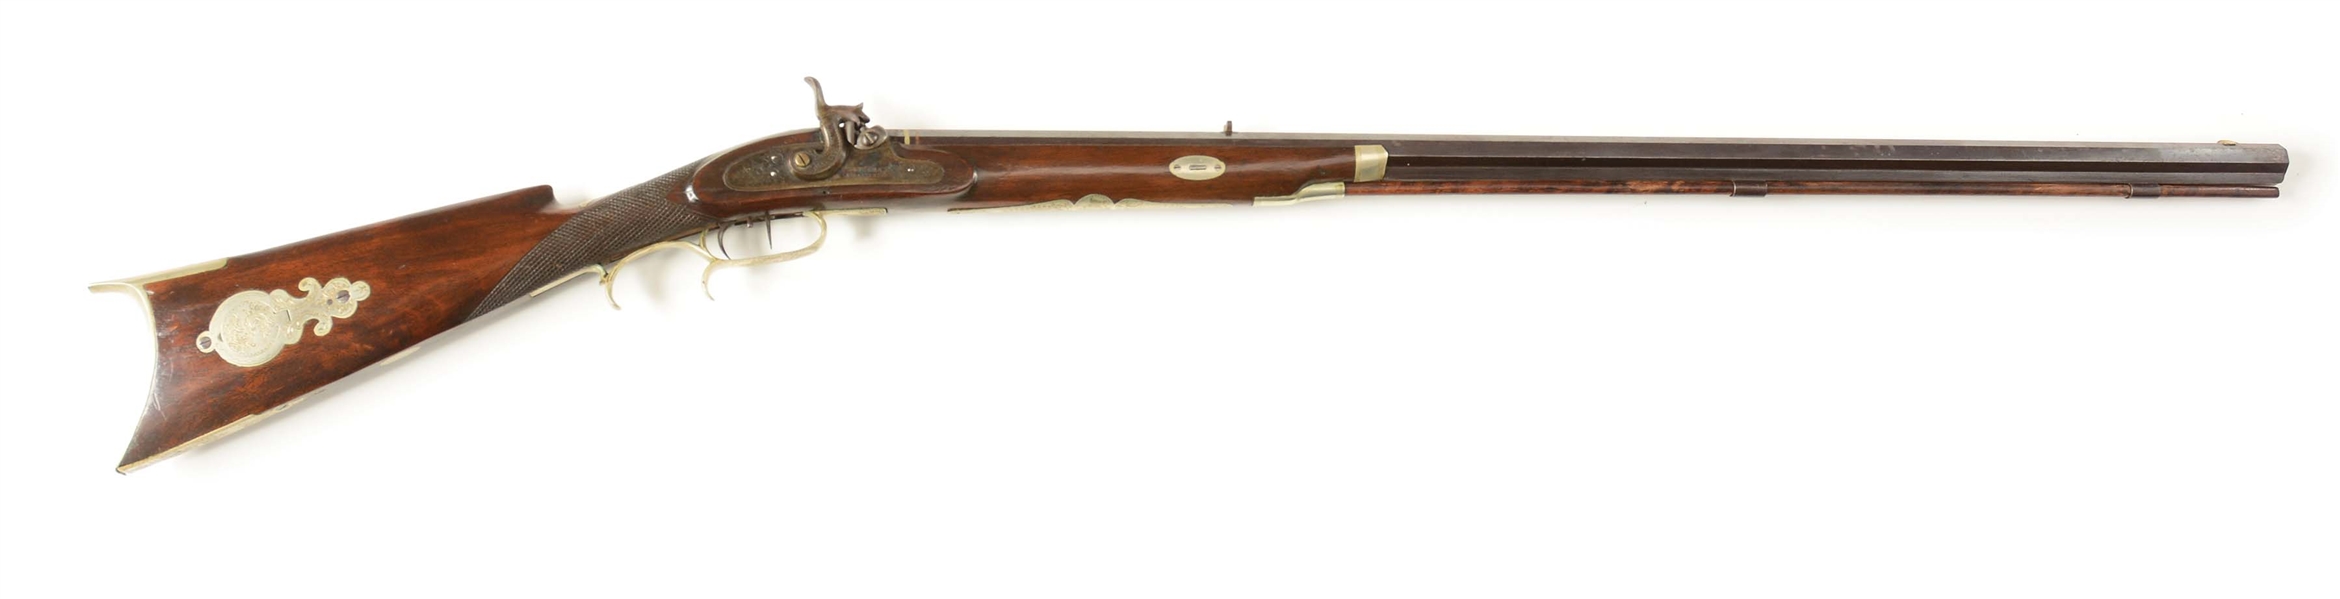 (A) EXQUISITIVE H. SHENK LANCASTER HALF STOCK KENTUCKY PERCUSSION SPORTING RIFLE.